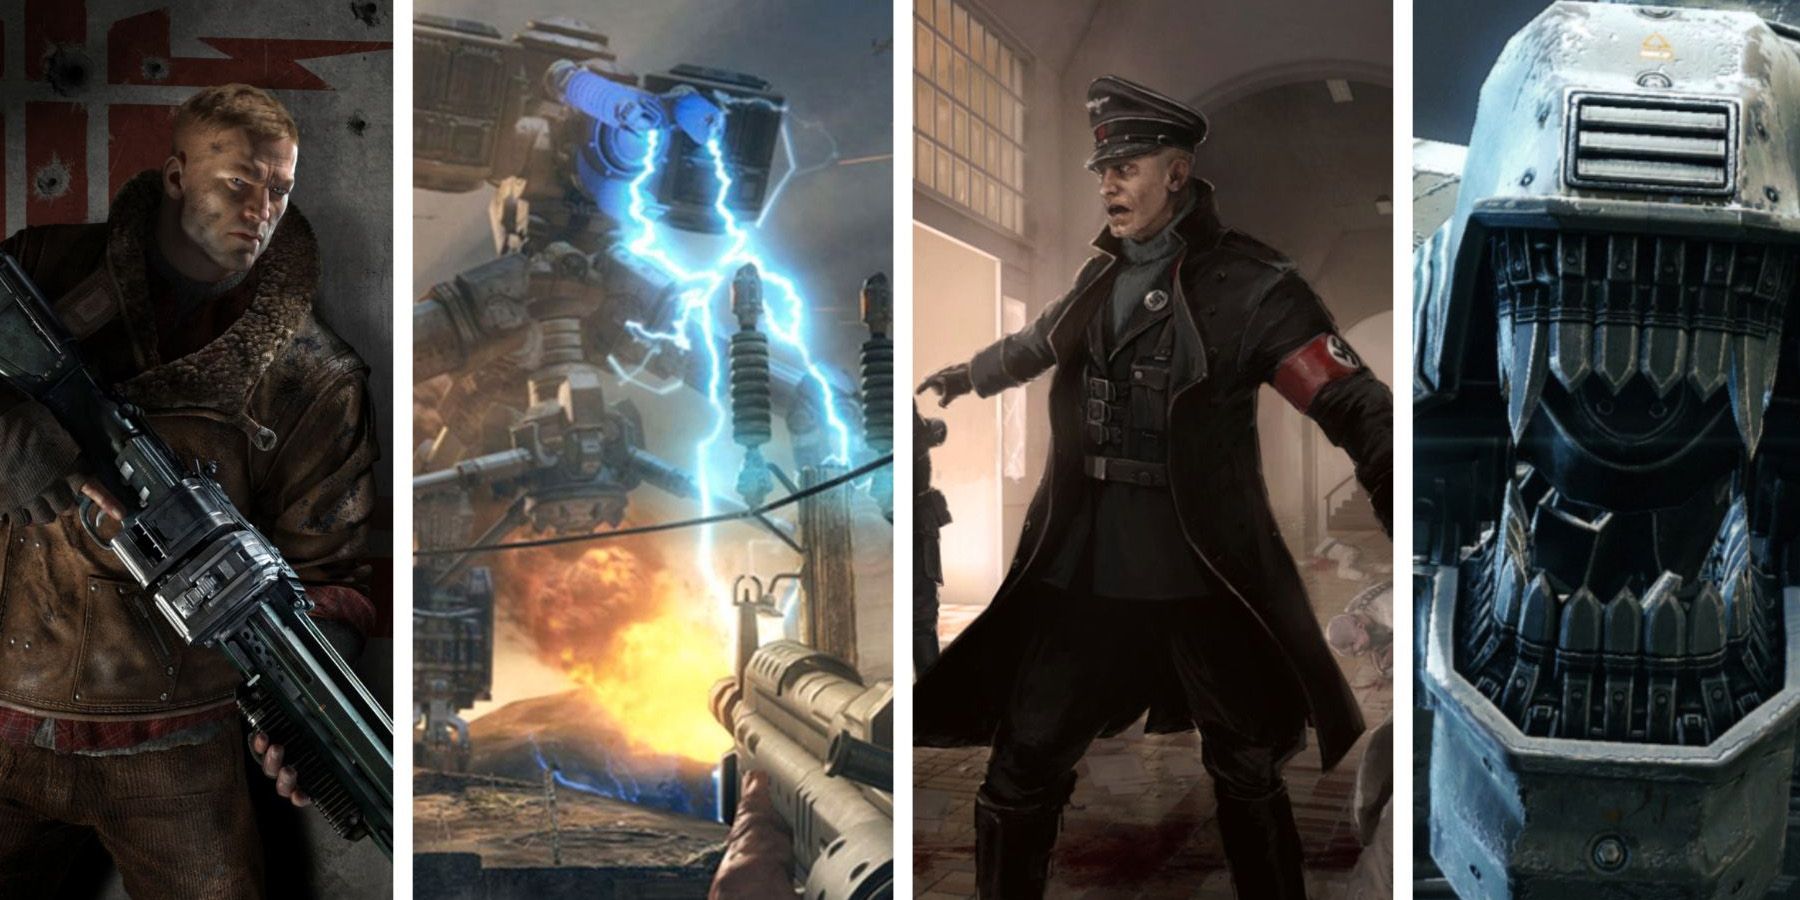 Mobility Game Review - Wolfenstein: The New Order - Can I Play That?